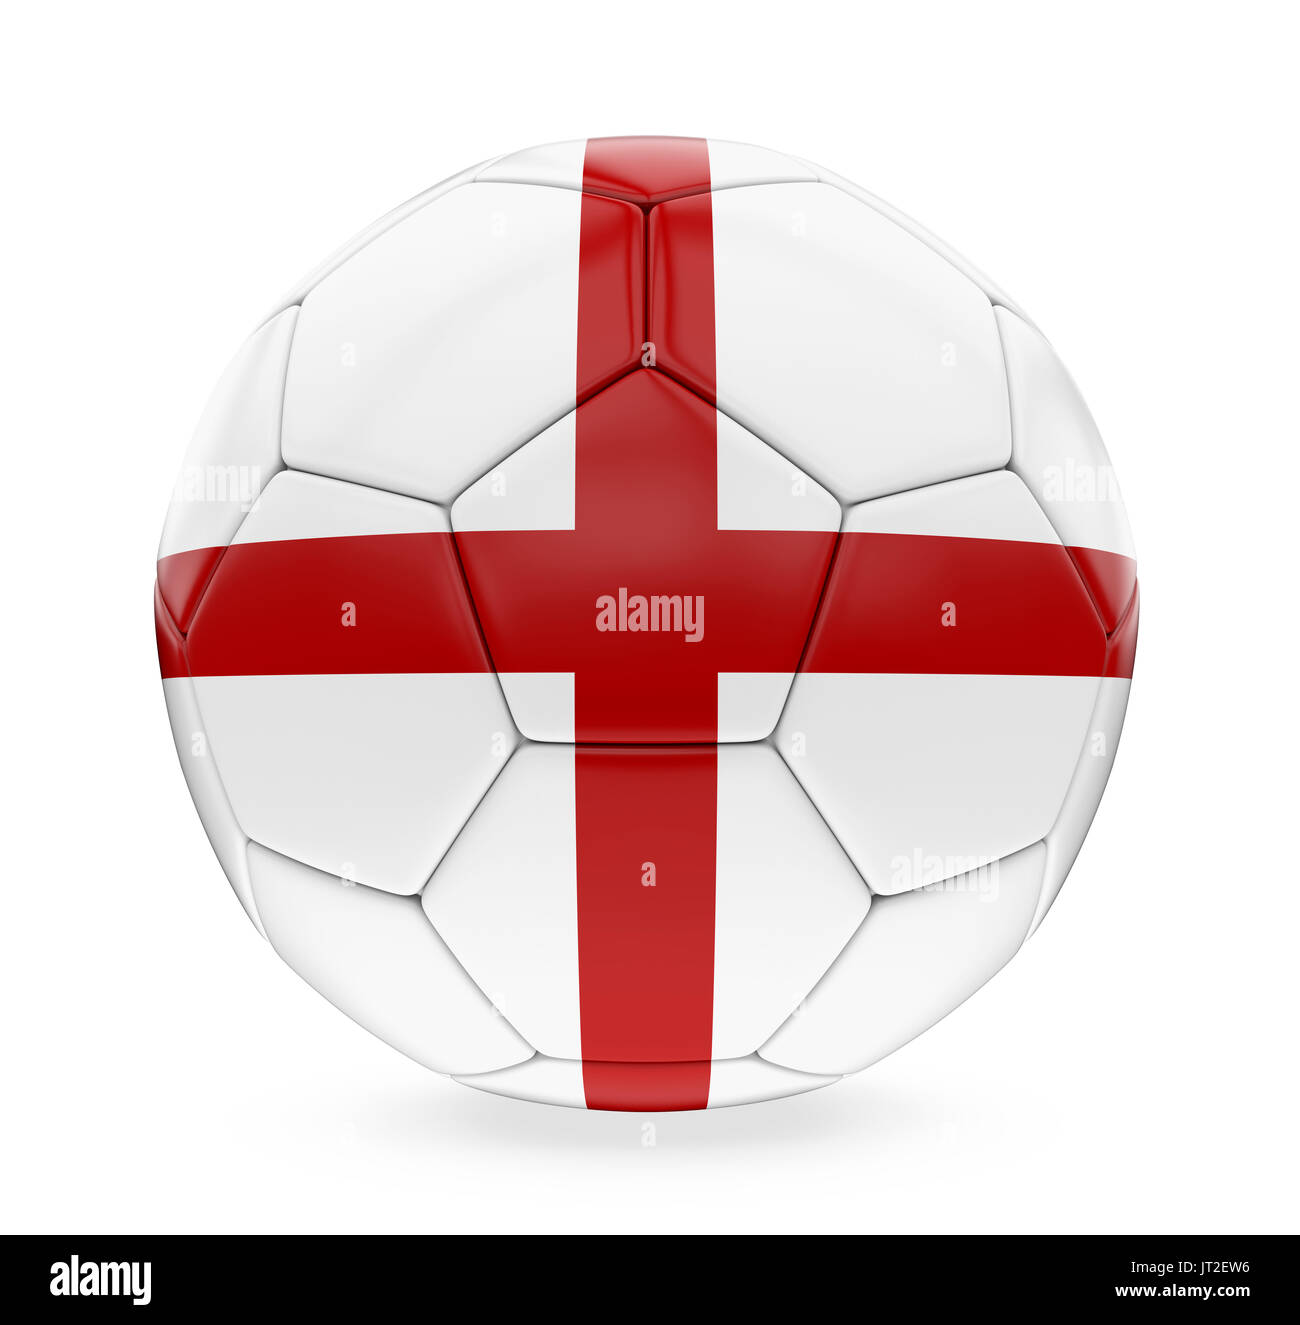 Football Penalty Kick England Cut Out Stock Images Pictures Alamy